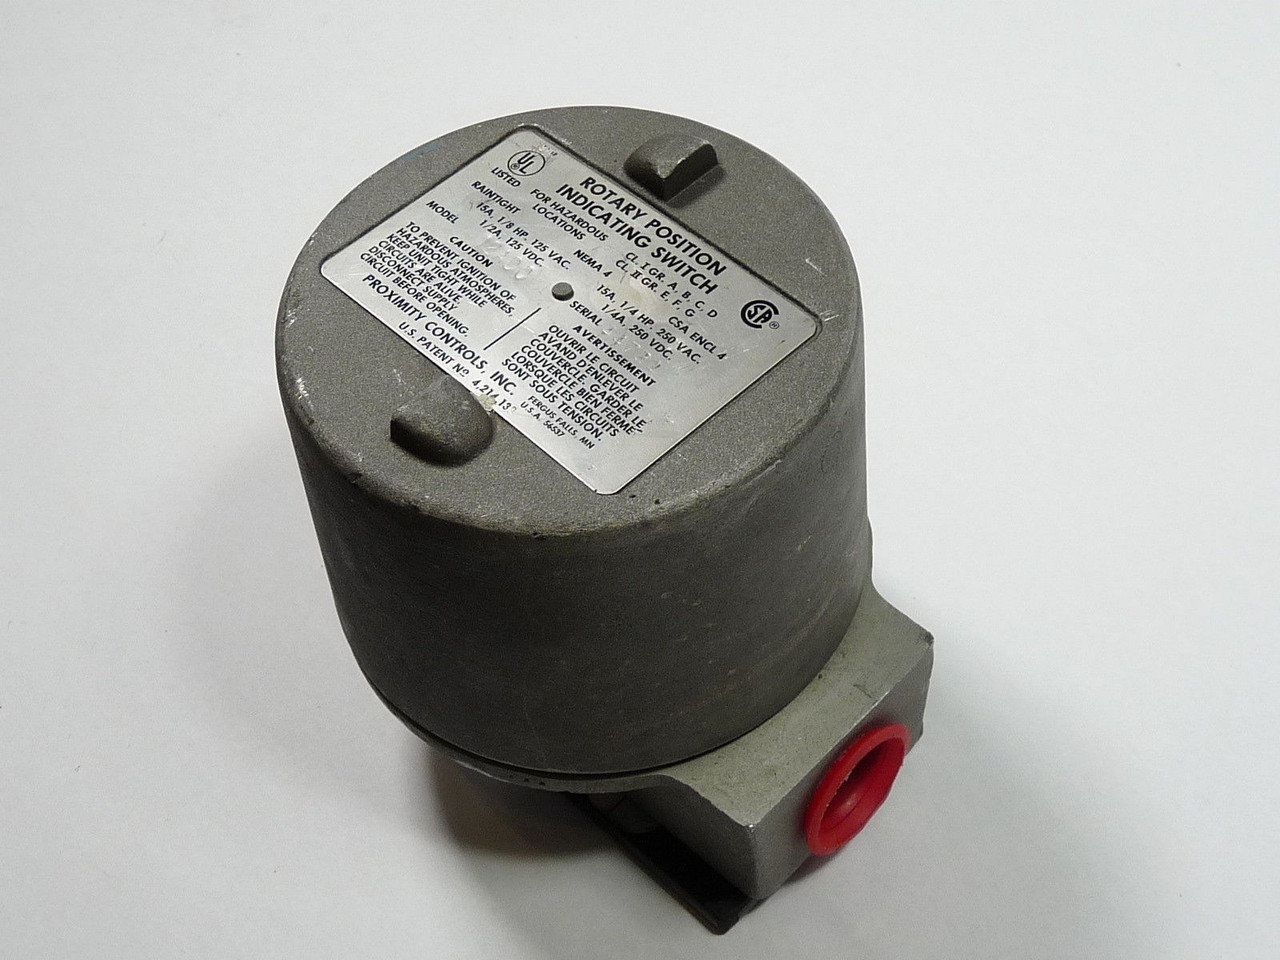 Proximity Controls 12AD0 Rotary Position Indicating Switch 15A 150/250V USED